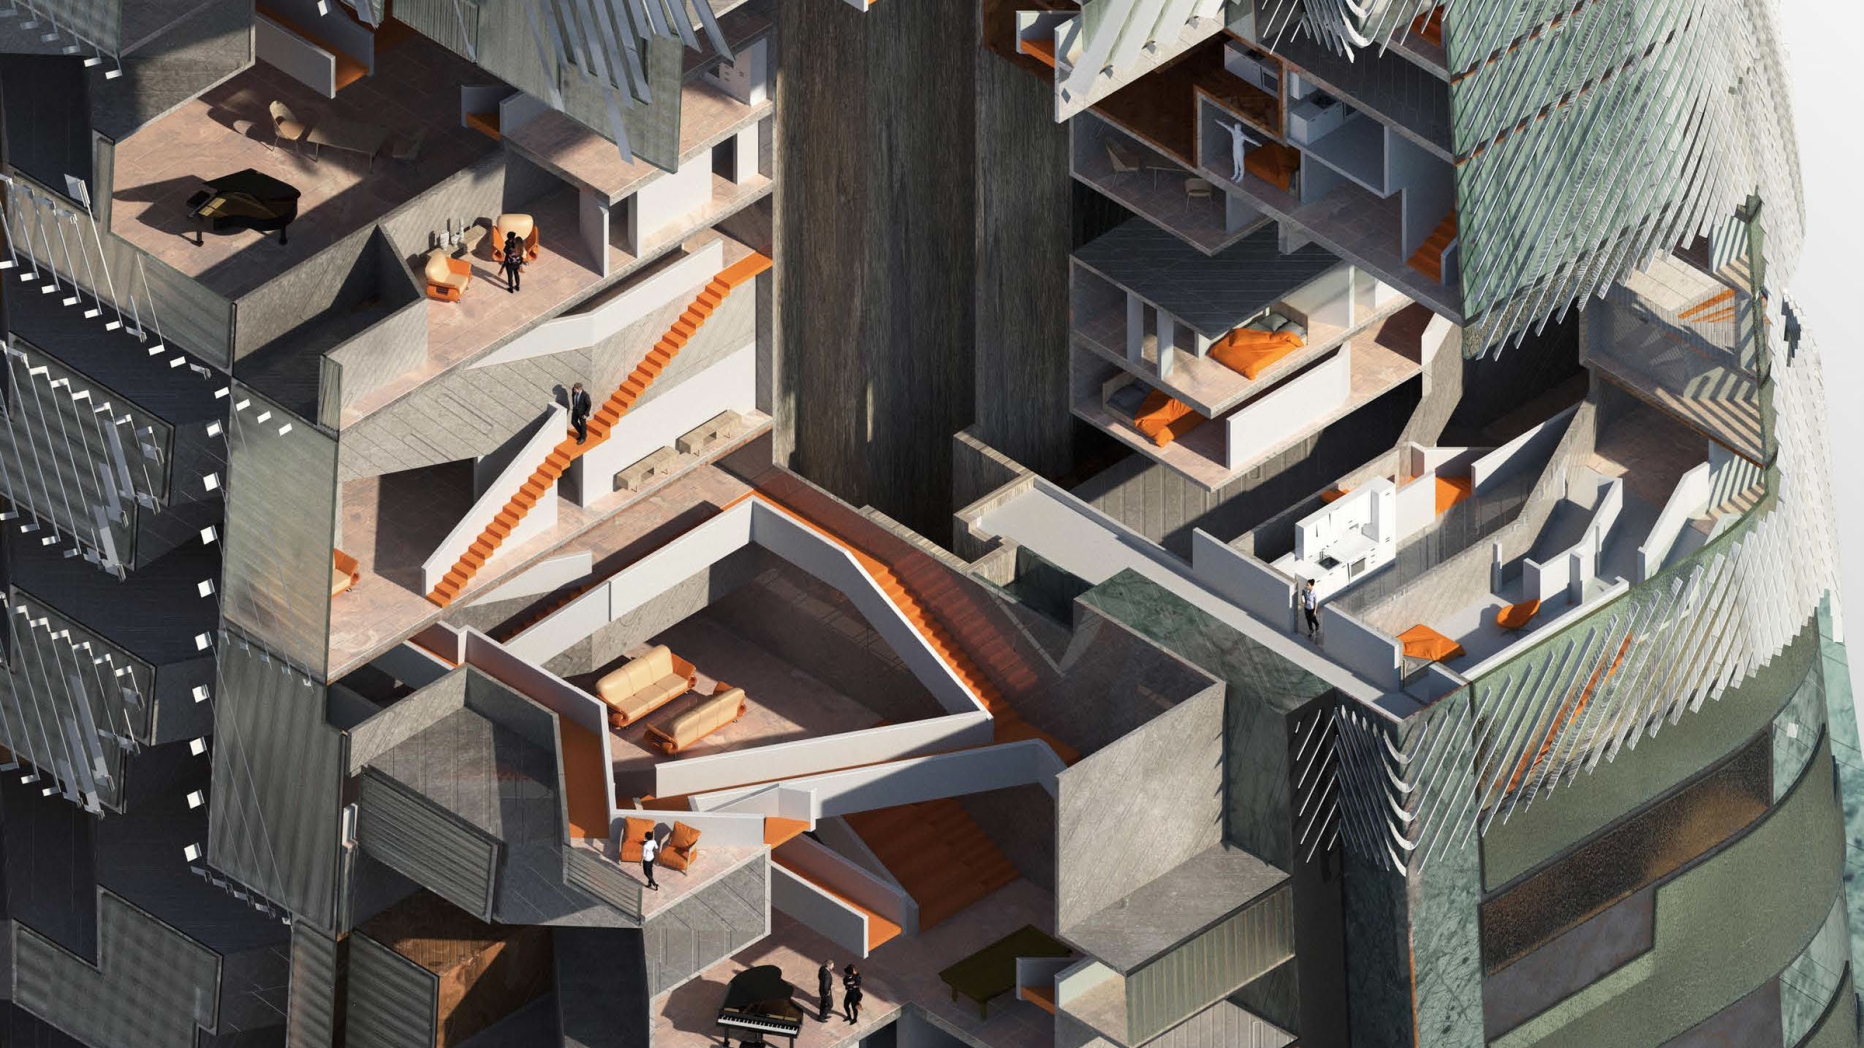 Partial cutaway of skyscraper. Design makes heavy use of oranges and browns. Also many multi floor open spaces